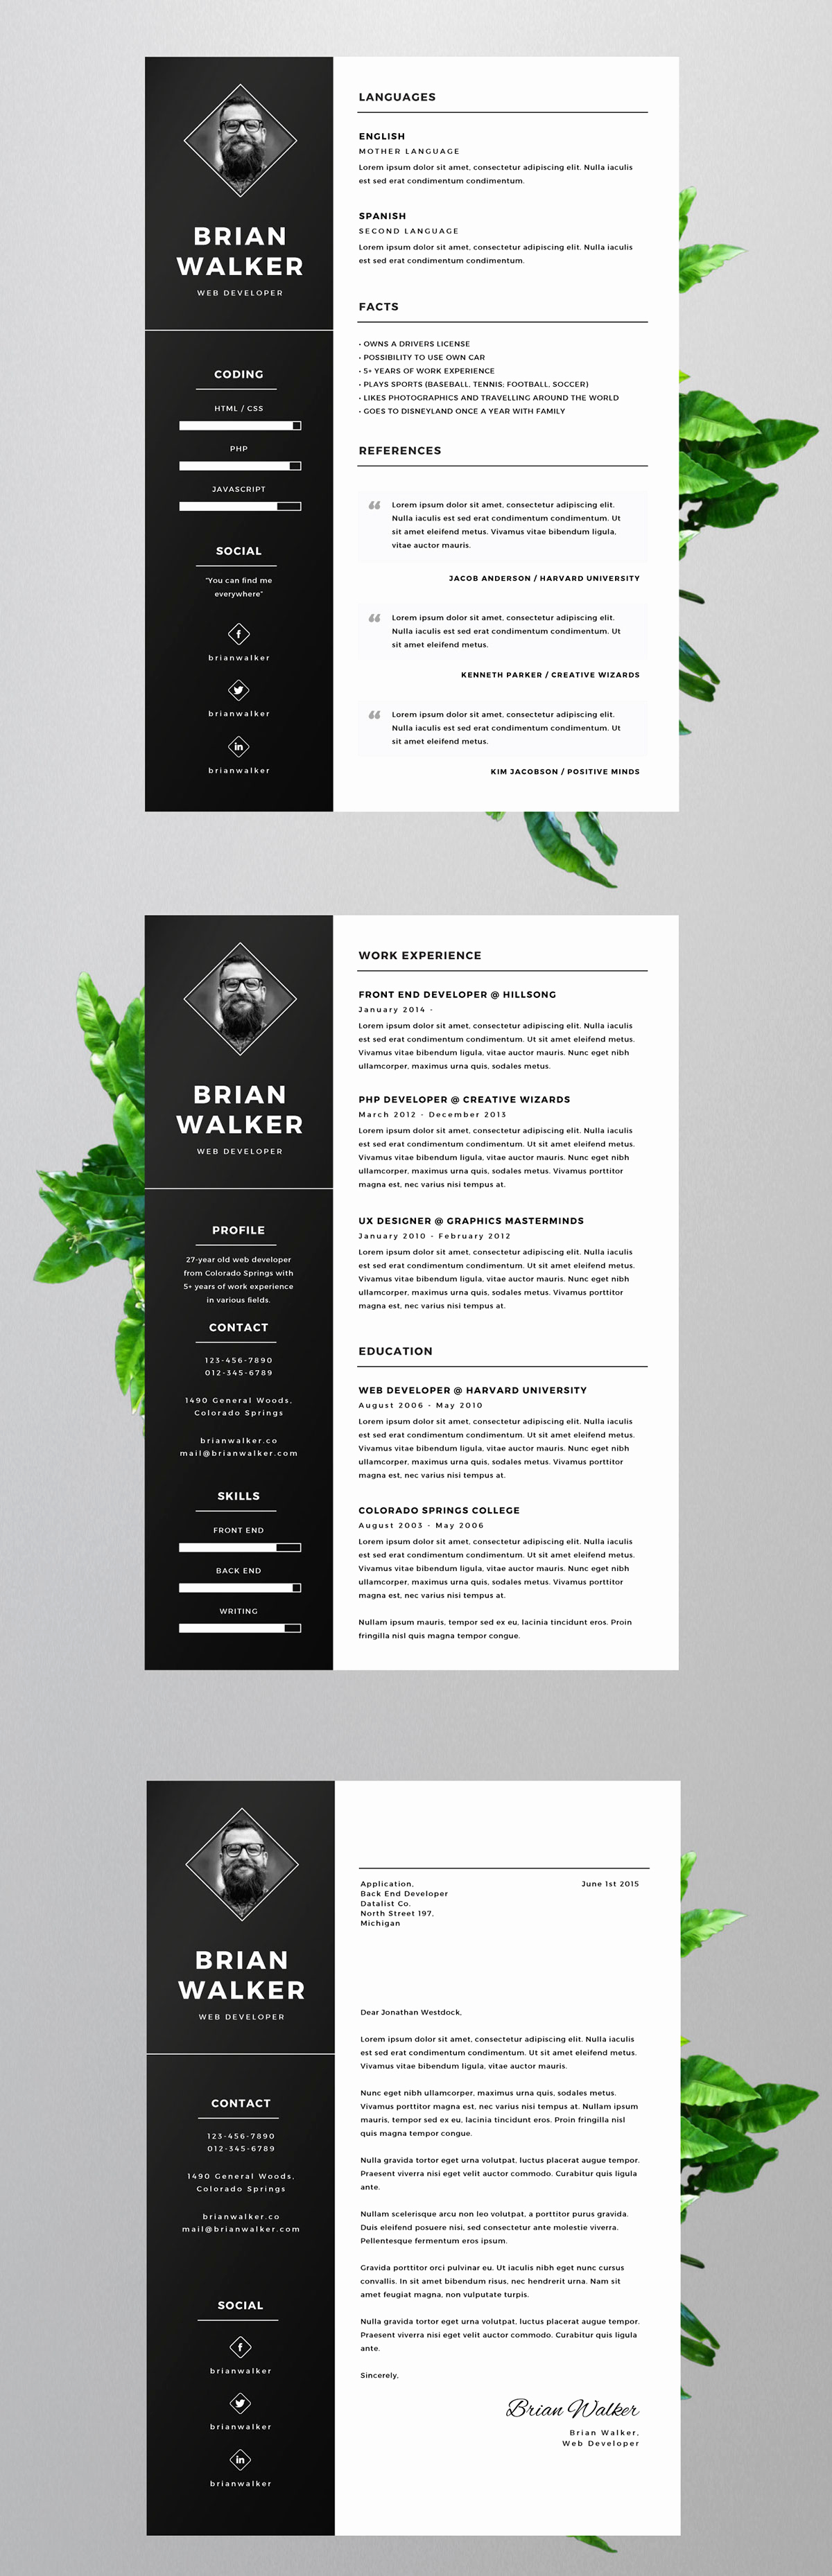 Free Resume Template for Word shop Illustrator